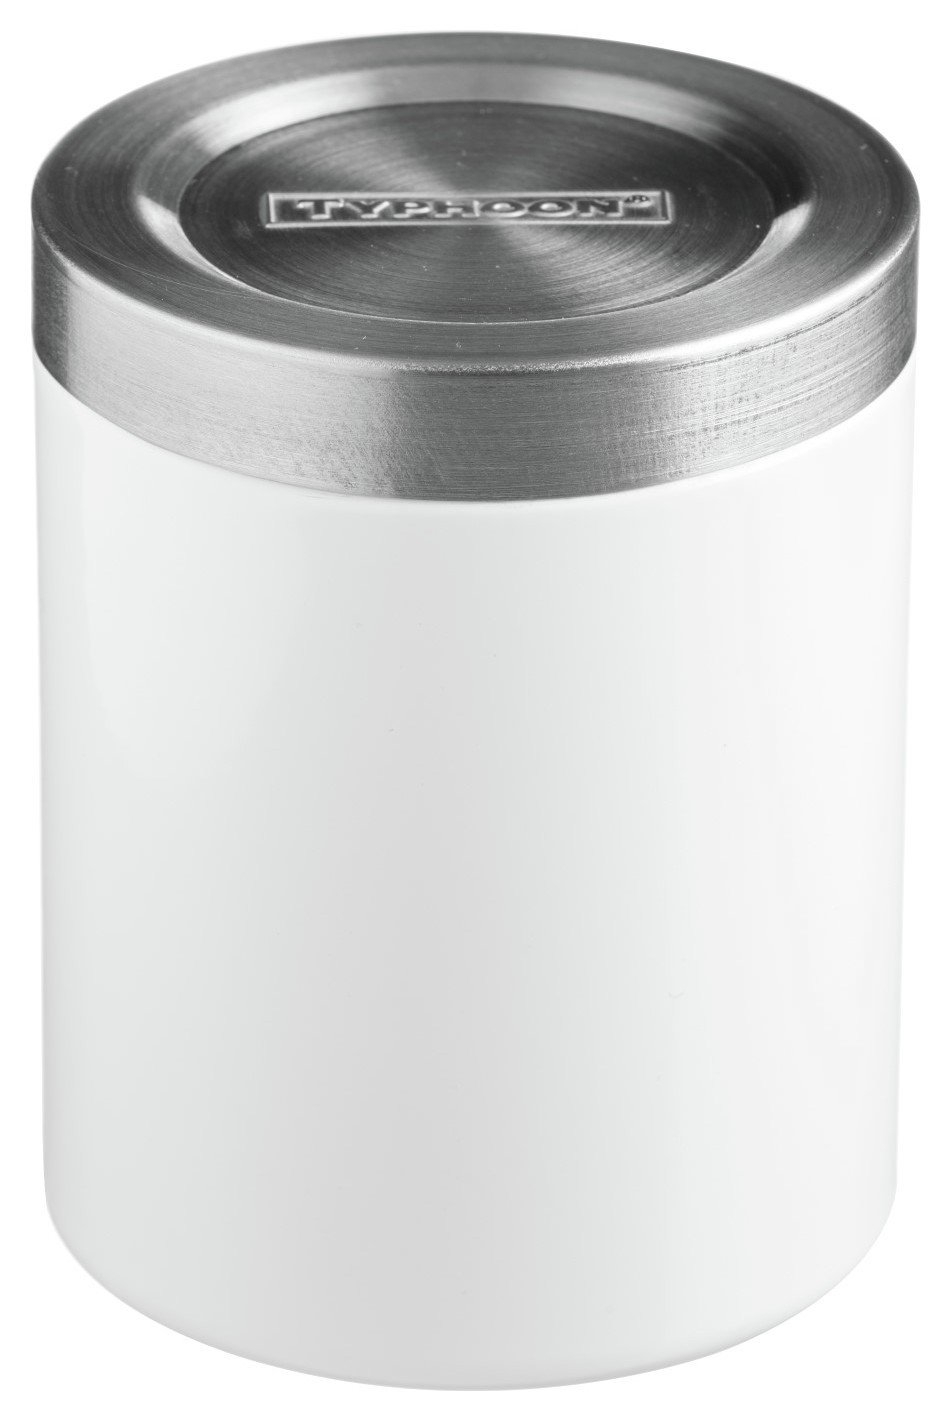 Typhoon Hudson 13cm Stacking Storage Canister - White